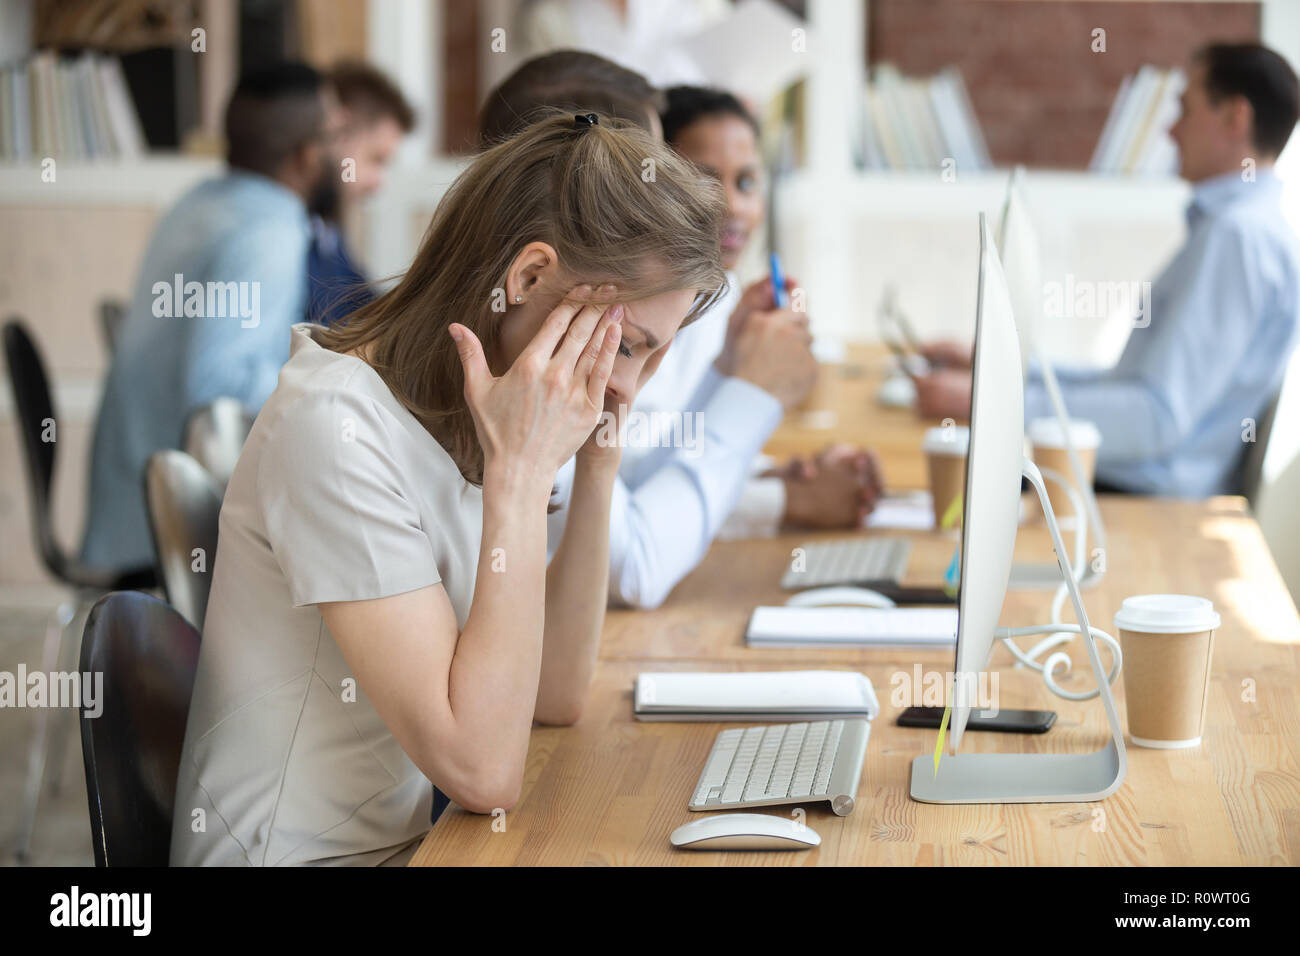 Female employee having health problems at workplace  Stock Photo